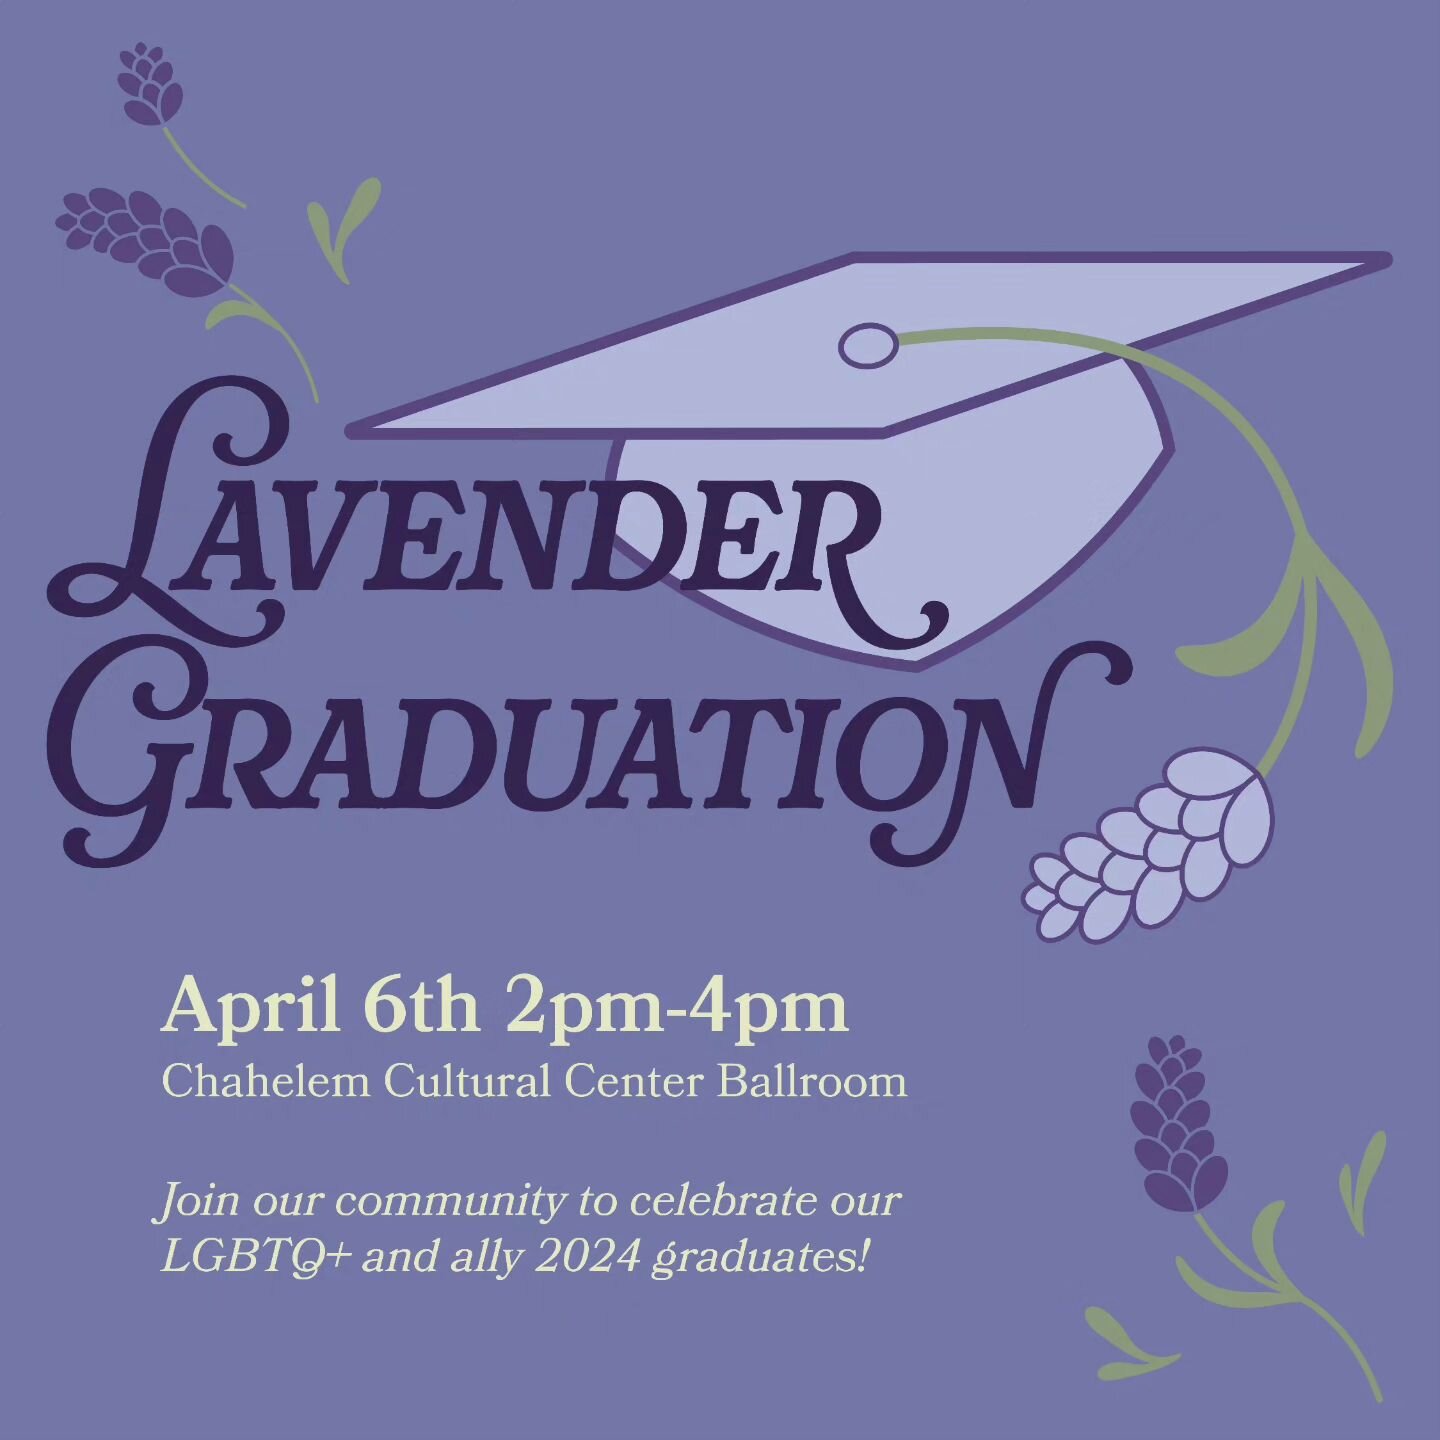 This year&rsquo;s Lavender Graduation will be held on April 6th, 2pm-4pm in the Chahelem Cultural Center ballroom! If you&rsquo;re a queer or ally student graduating this year (this semester or last semester) fill out the google form in our bio so we